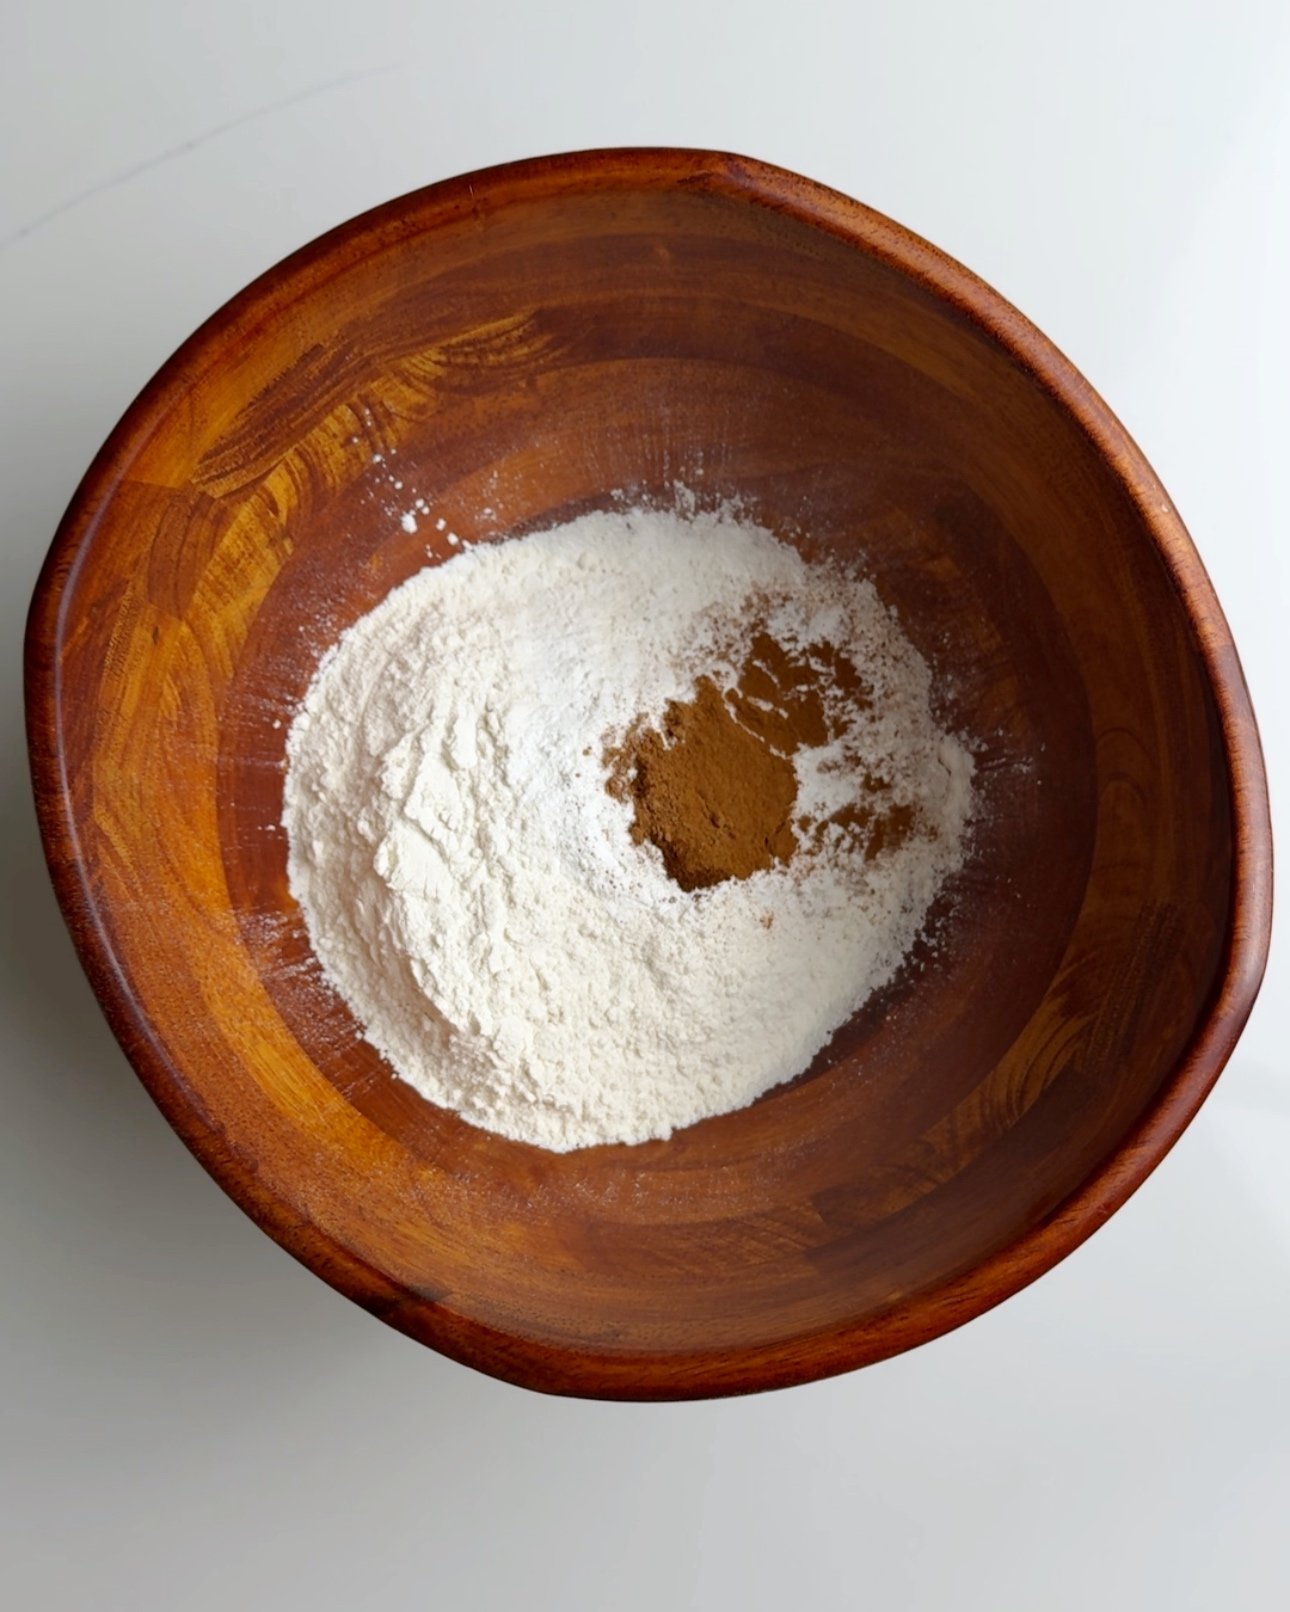 Dry ingredients for soft mithai in a wooden bowl